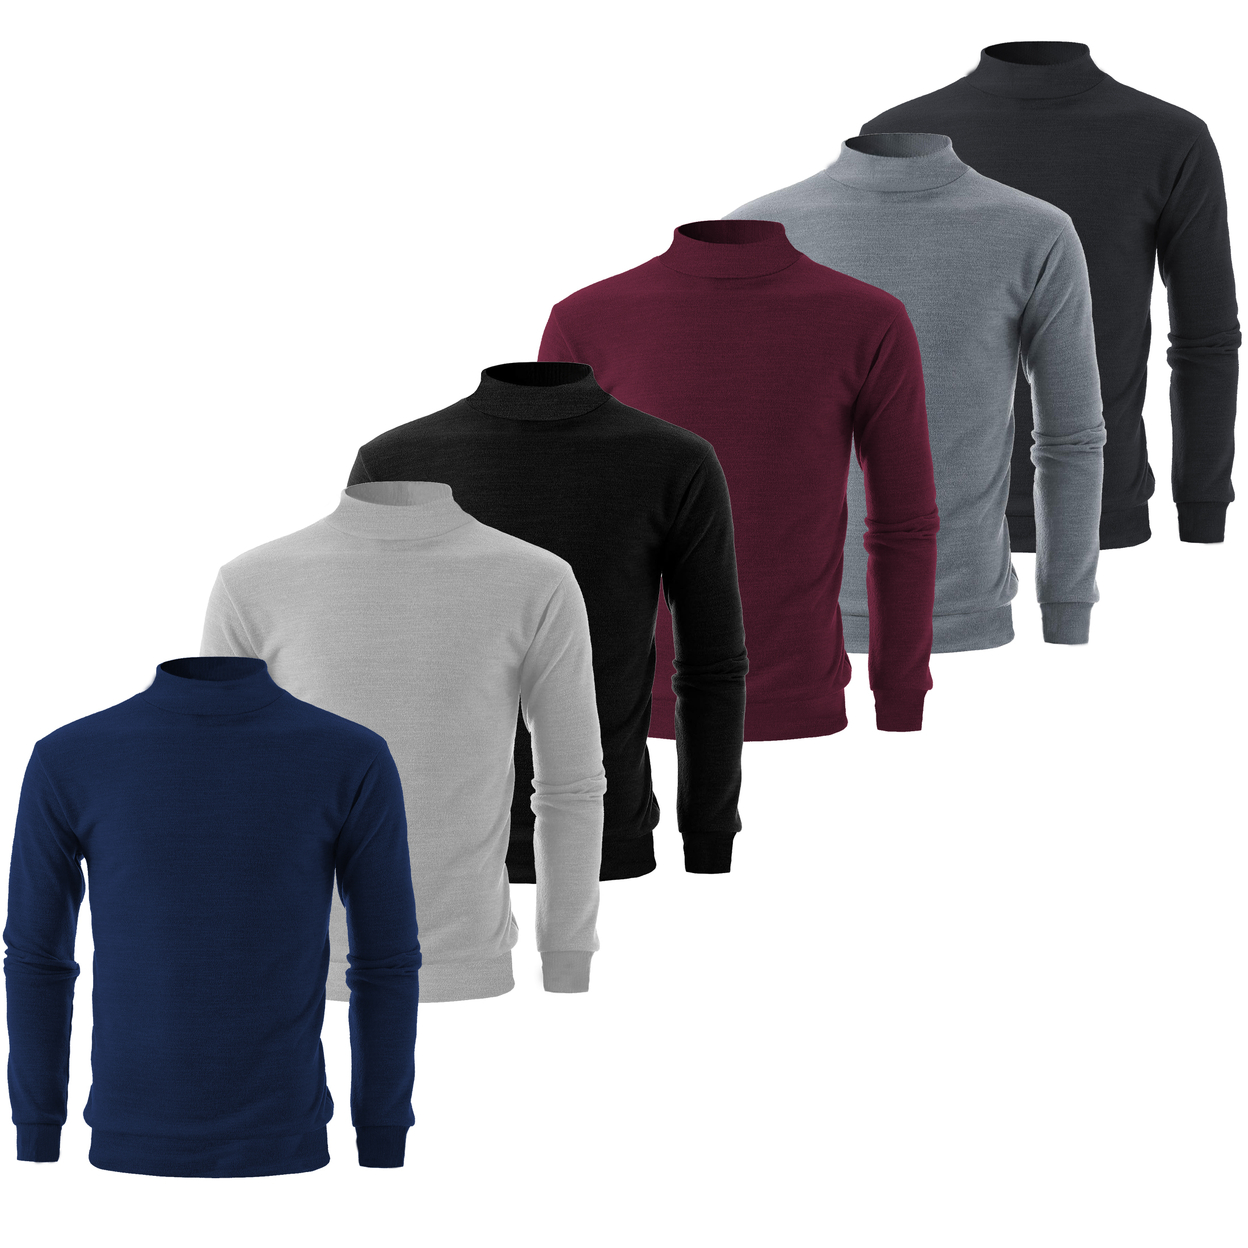 Multi-Pack: Men's Winter Warm Cozy Knit Slim Fit Mock Neck Sweater - 1-pack, Small